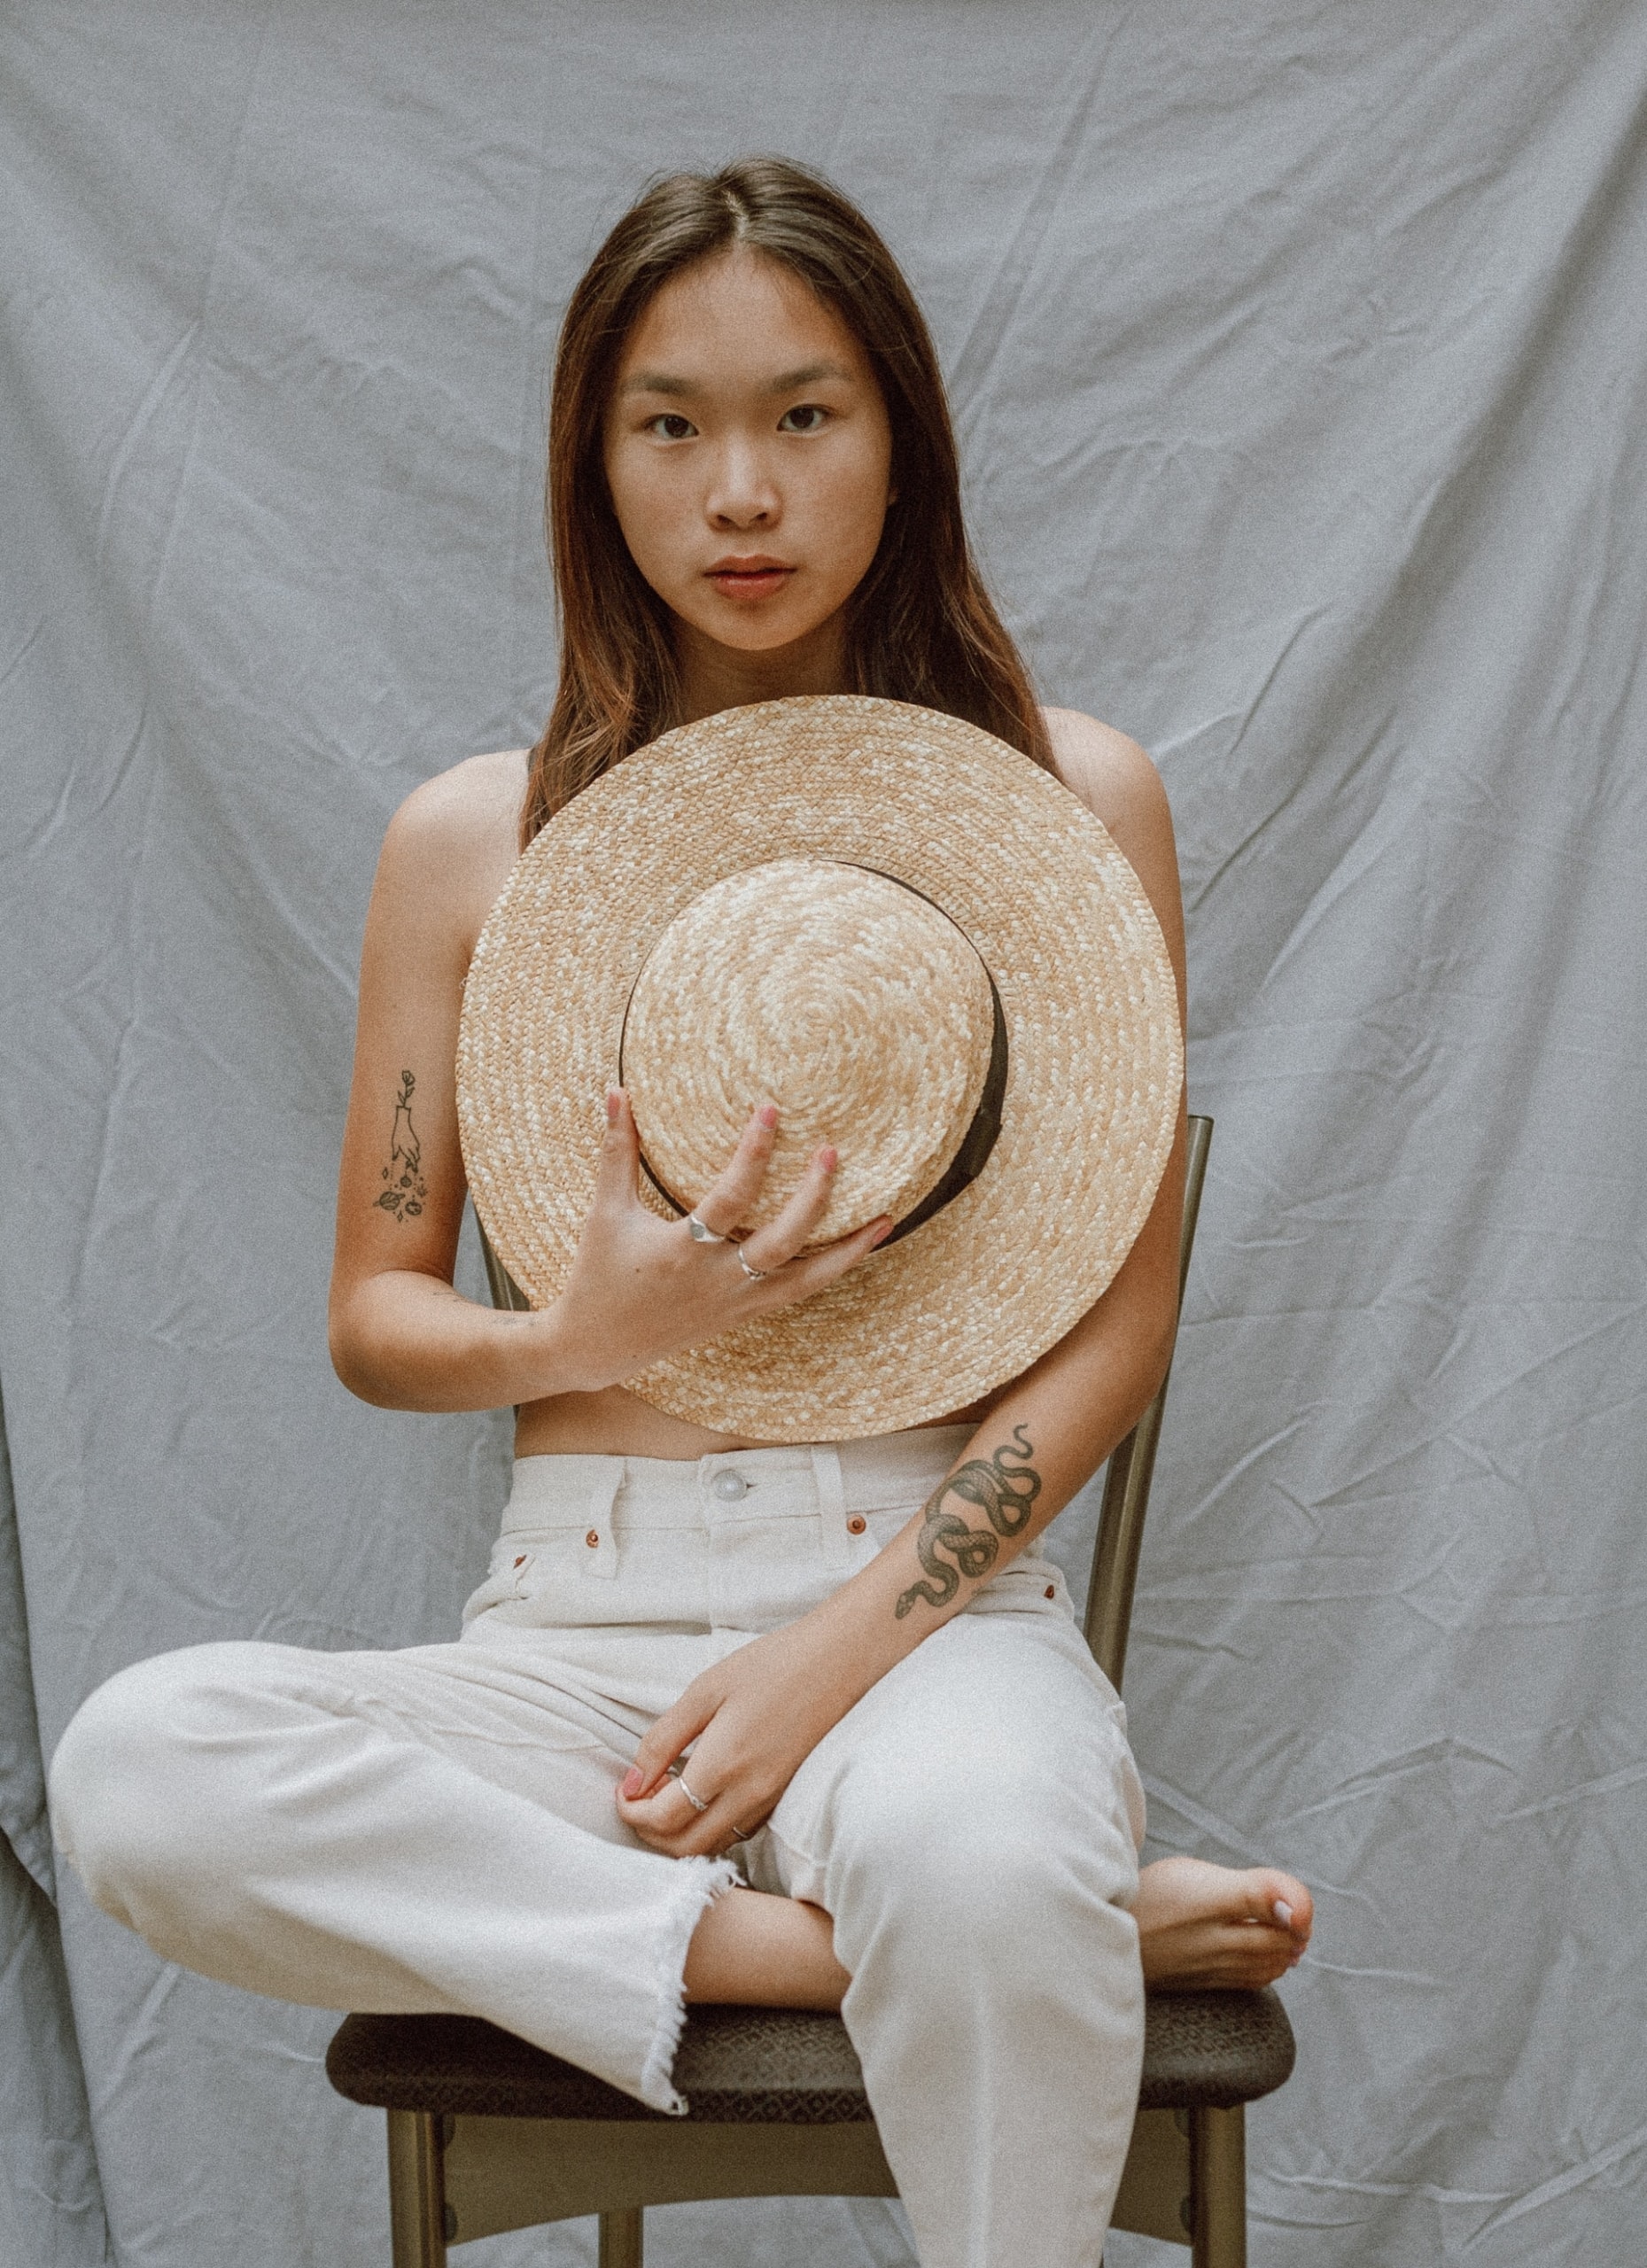 Straw hat – how to style it this summer?